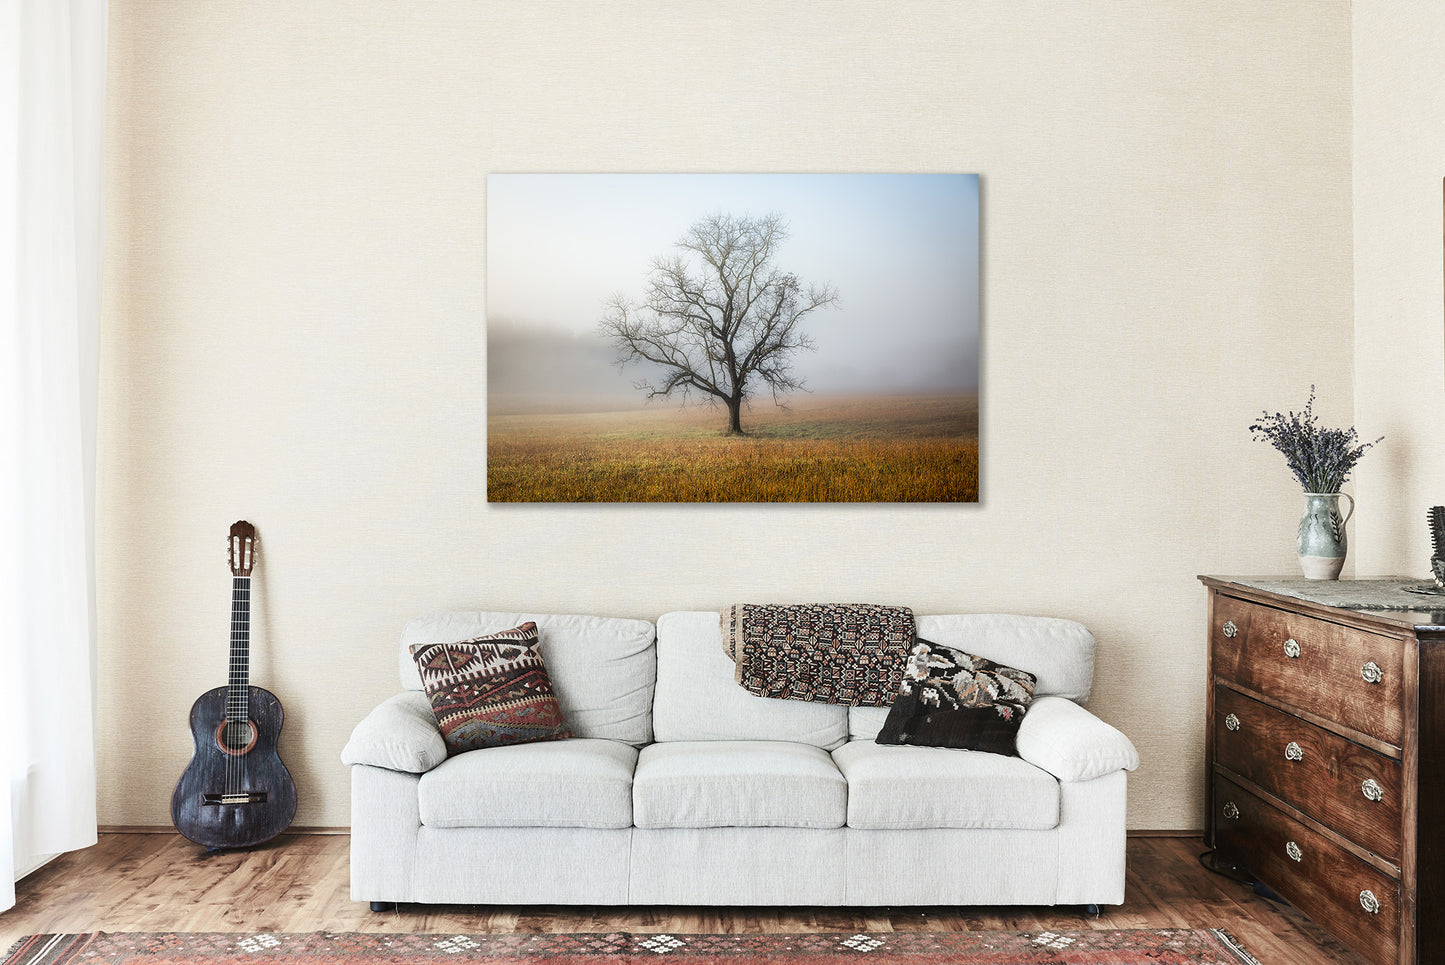 Canvas Wall Art - Gallery Wrap of Tree in Fog on Autumn Morning in Great Smoky Mountains Tennessee - Nature Wall Art Minimalism Decor